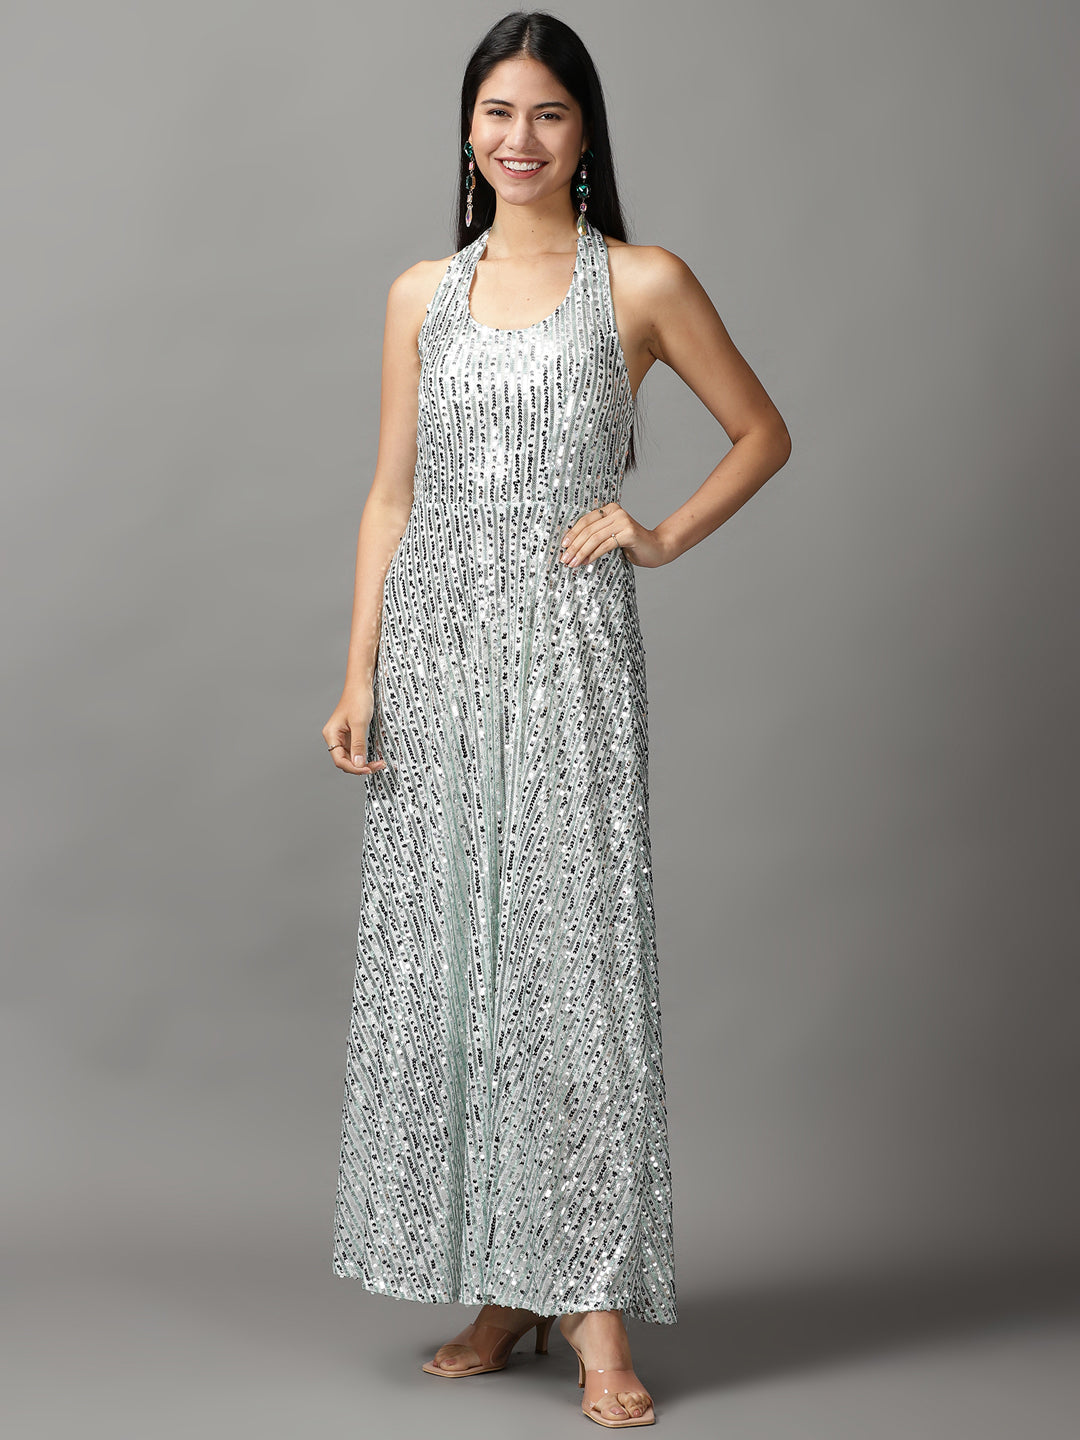 Women's Silver Embellished Gown Dress